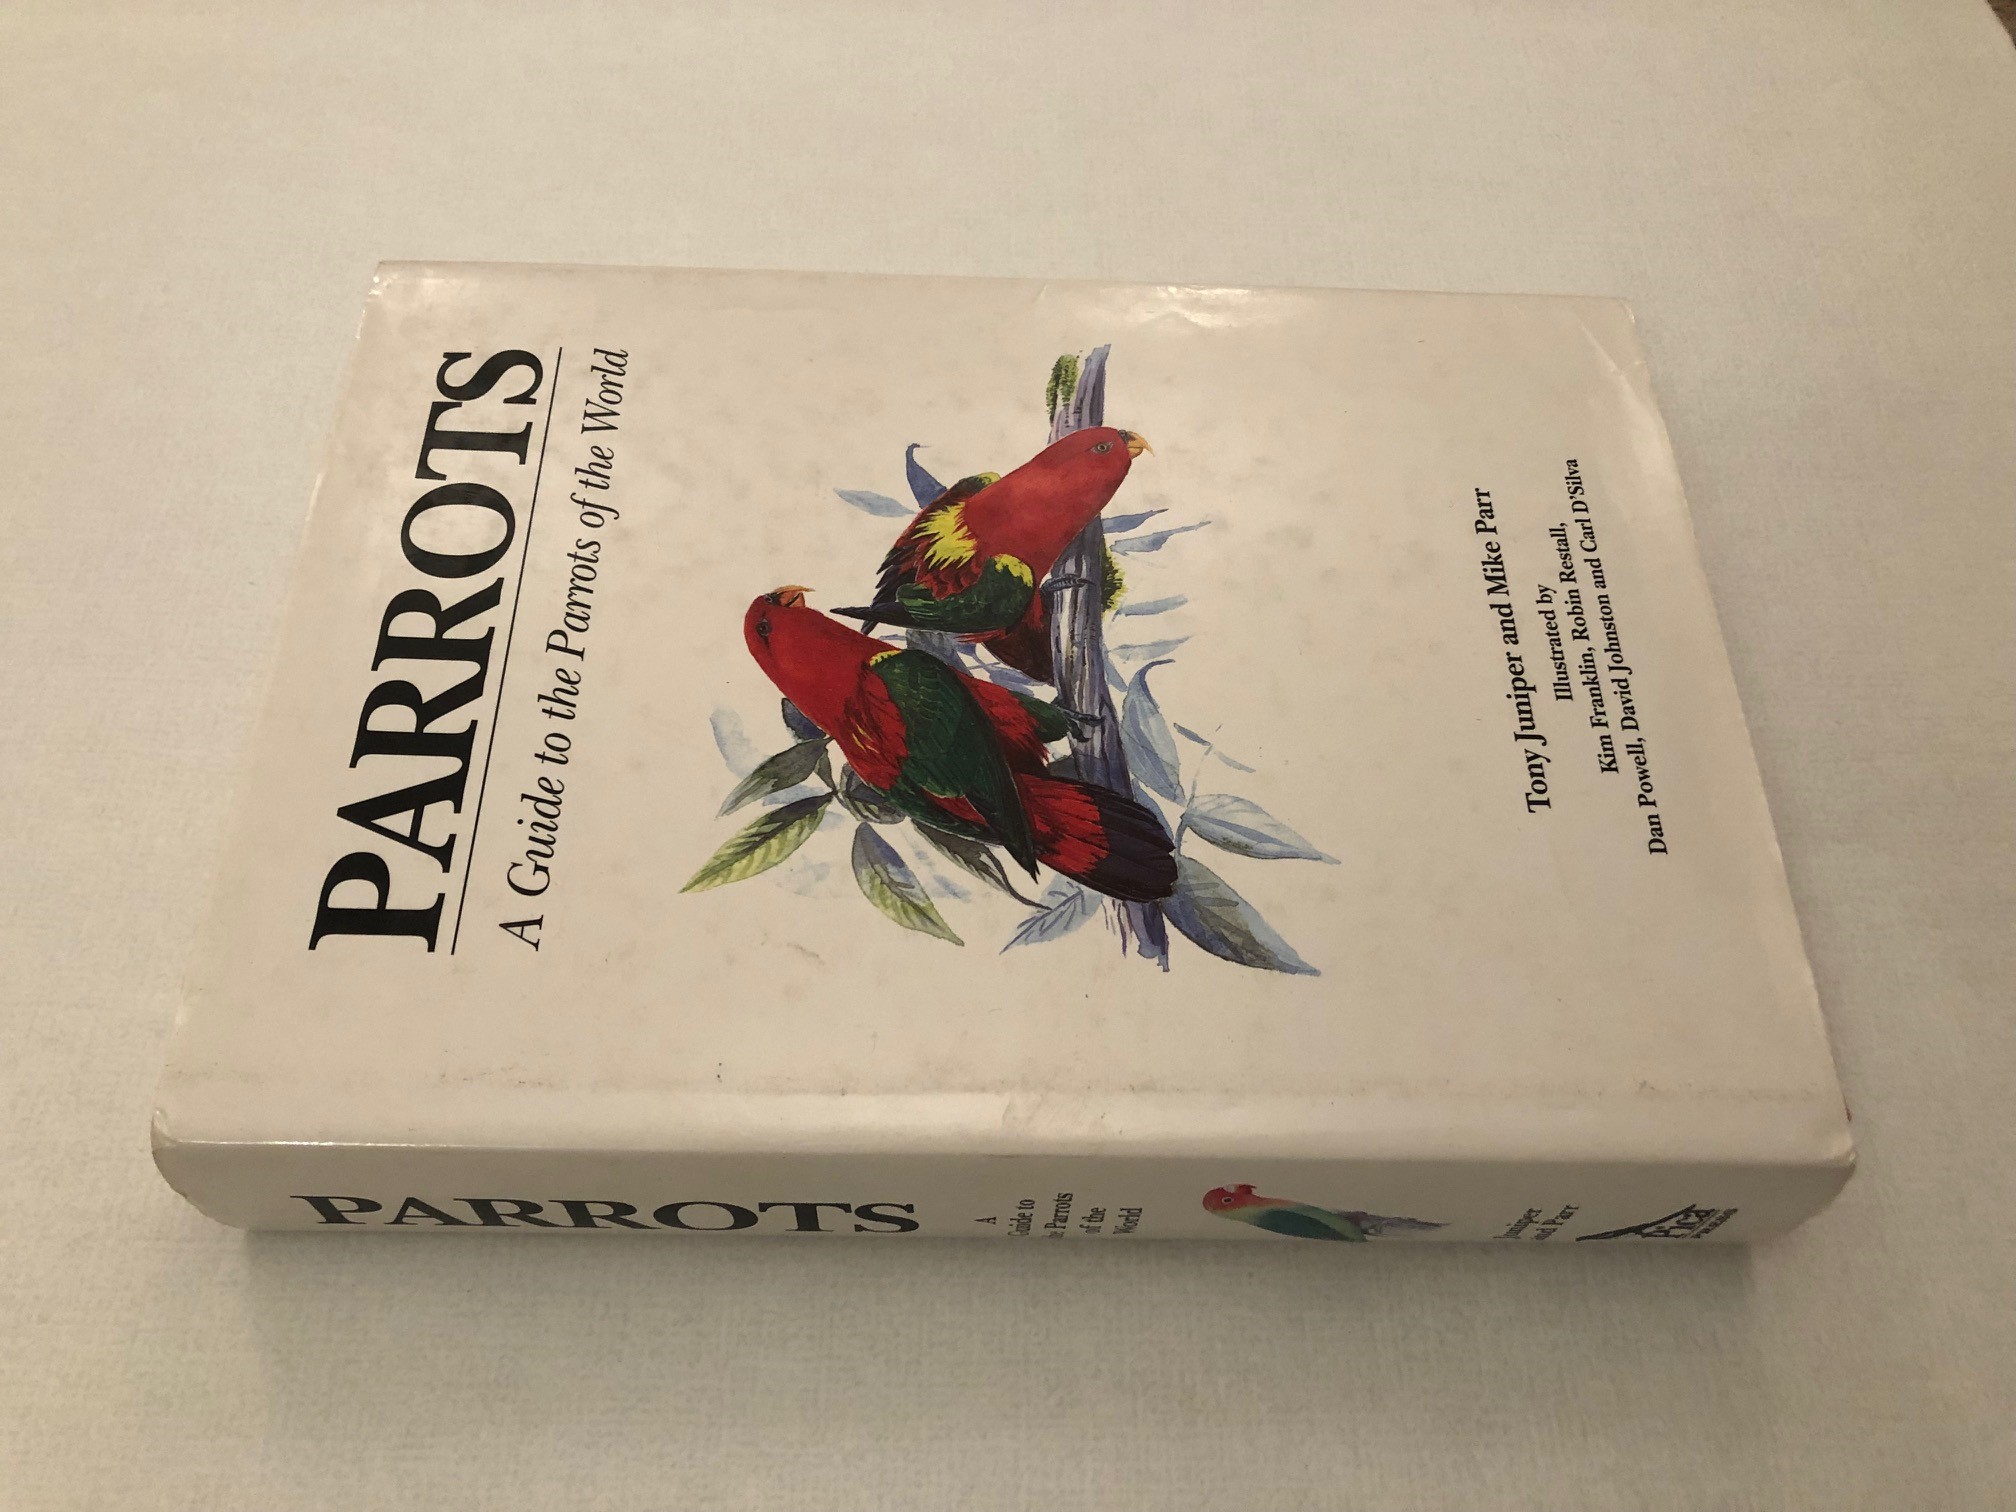 Parrots: A Guide to the Parrots of the World - Tony Juniper & Mike Parr